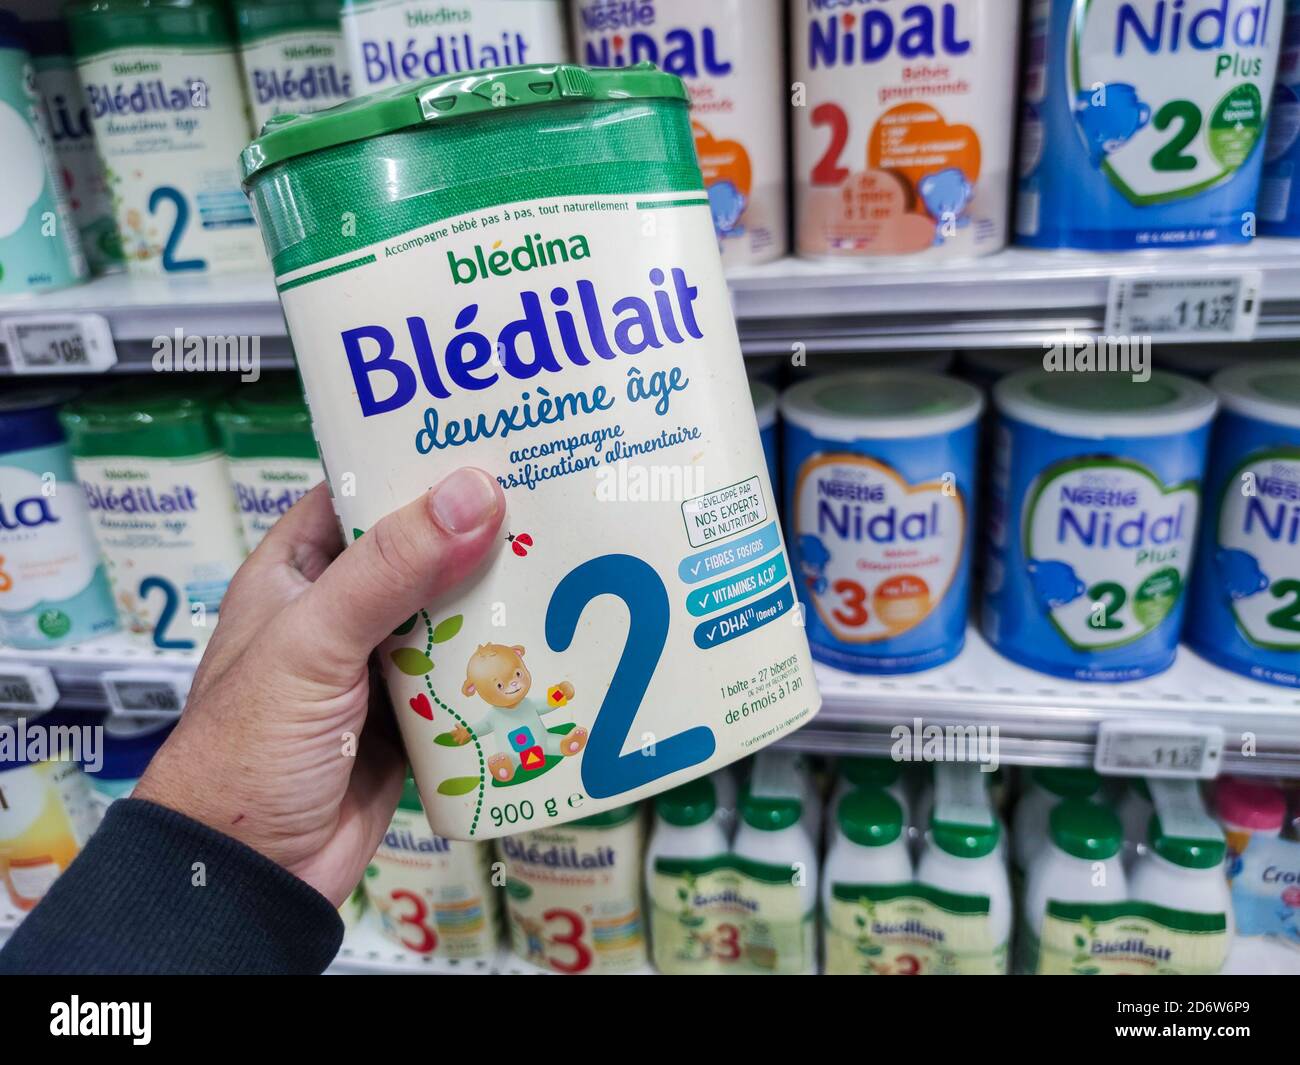 A Consumer Chooses a Box of Bledilait Brand Baby Milk from the